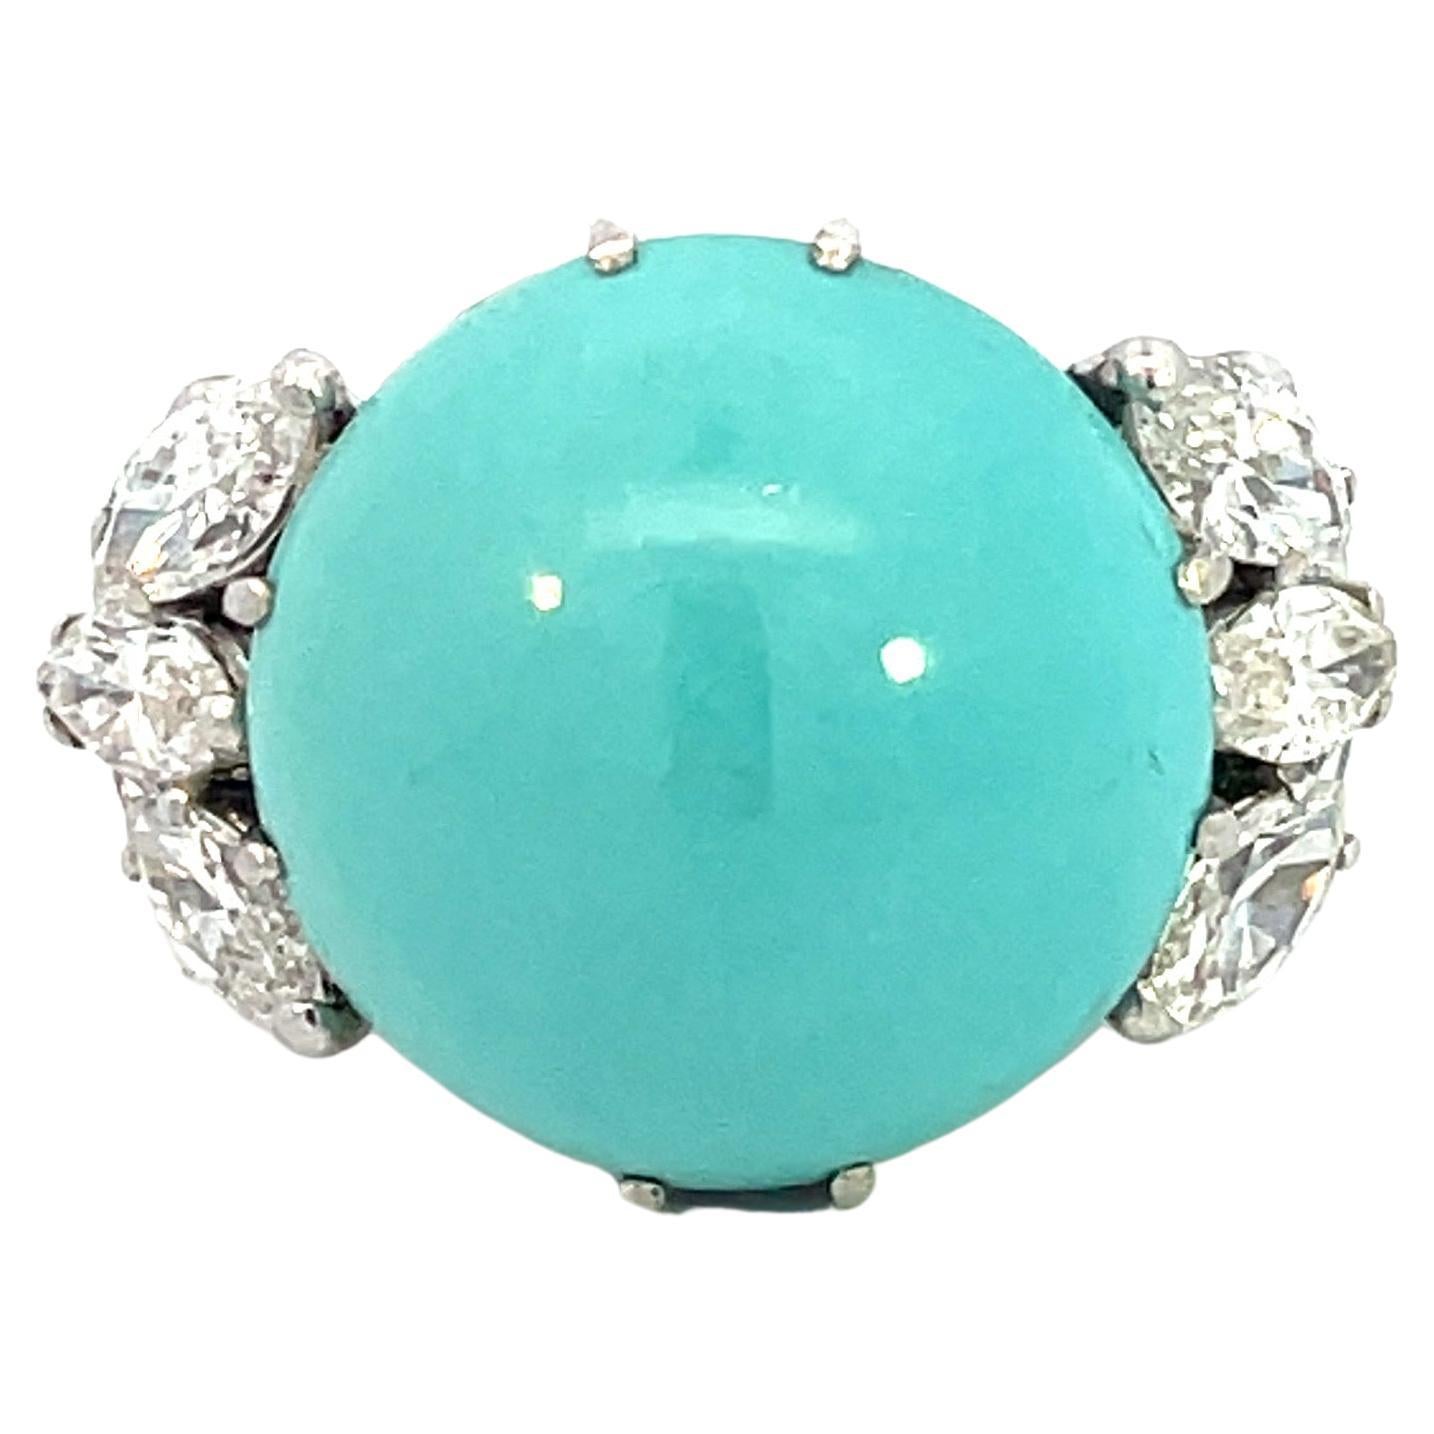 Vintage Natural Turquoise and marquise Diamonds Ring white gold 18kt